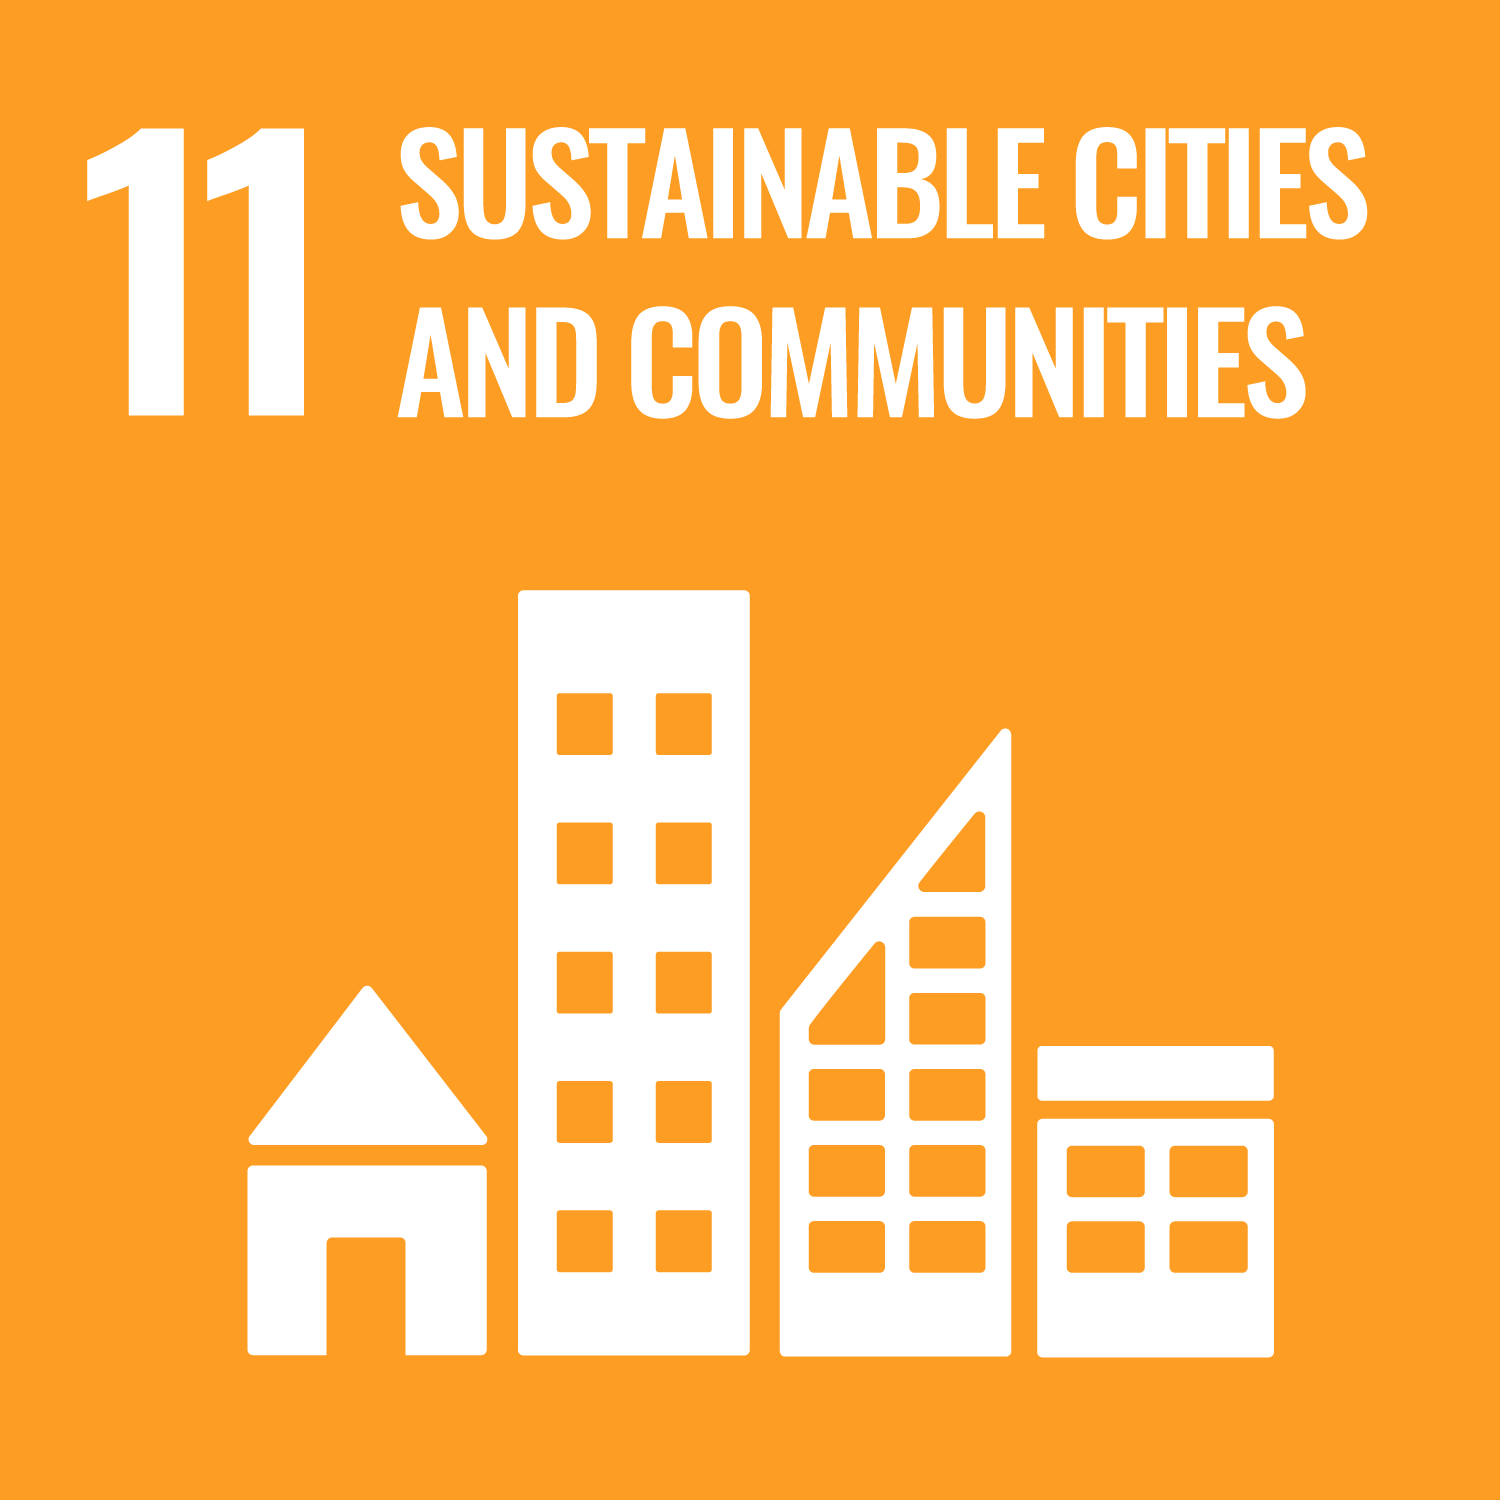 Target 11．Sustainable cities and communities